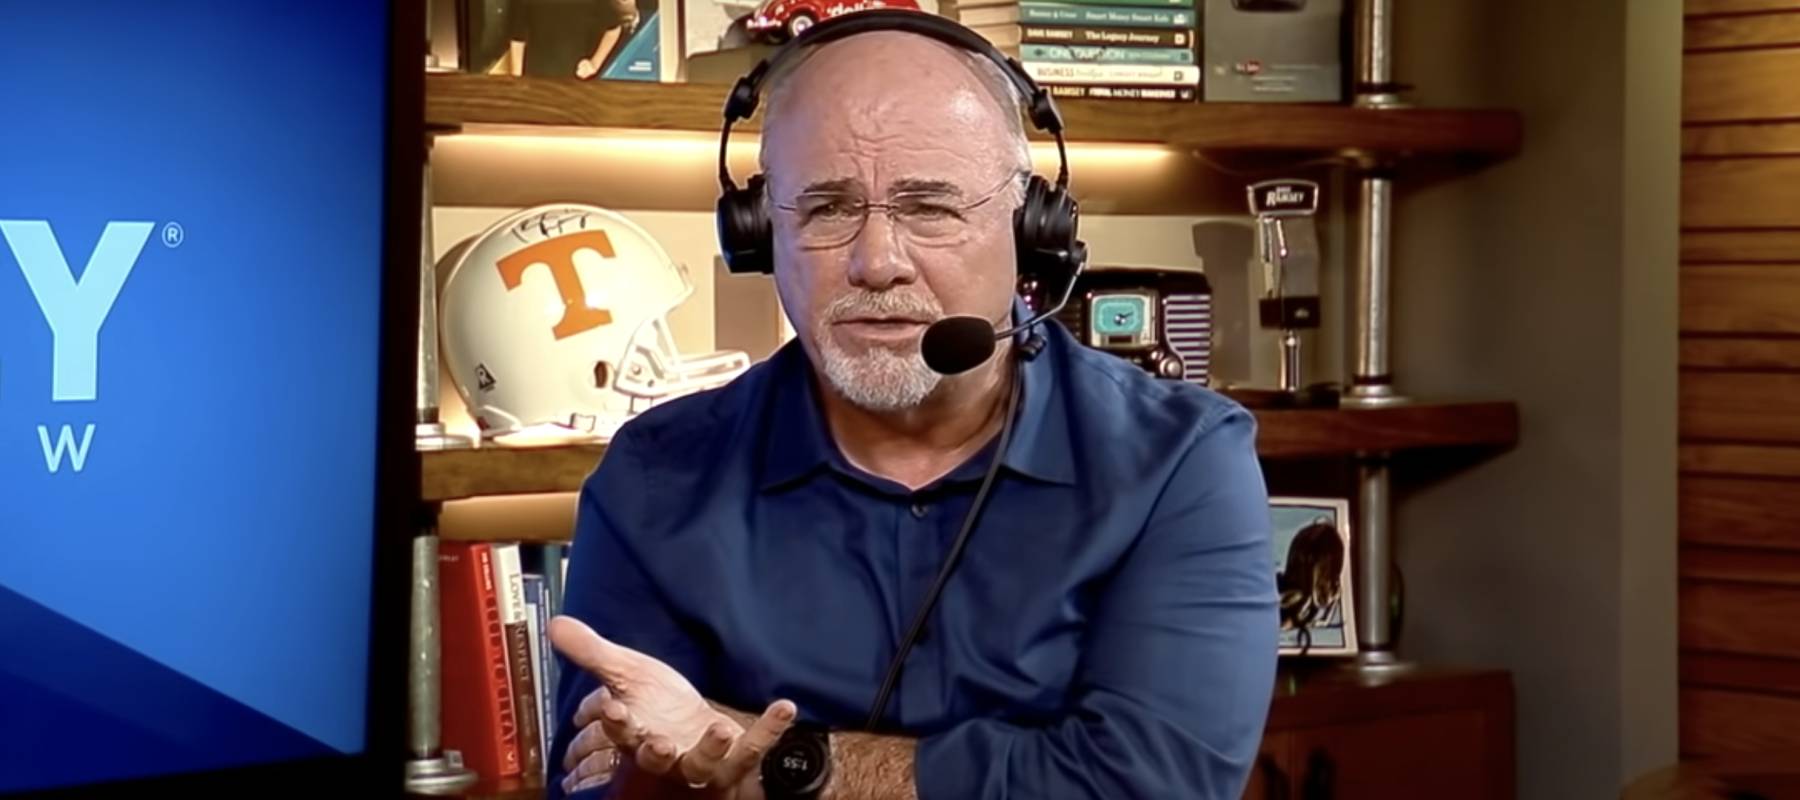 Dave Ramsey of The Ramsey Show